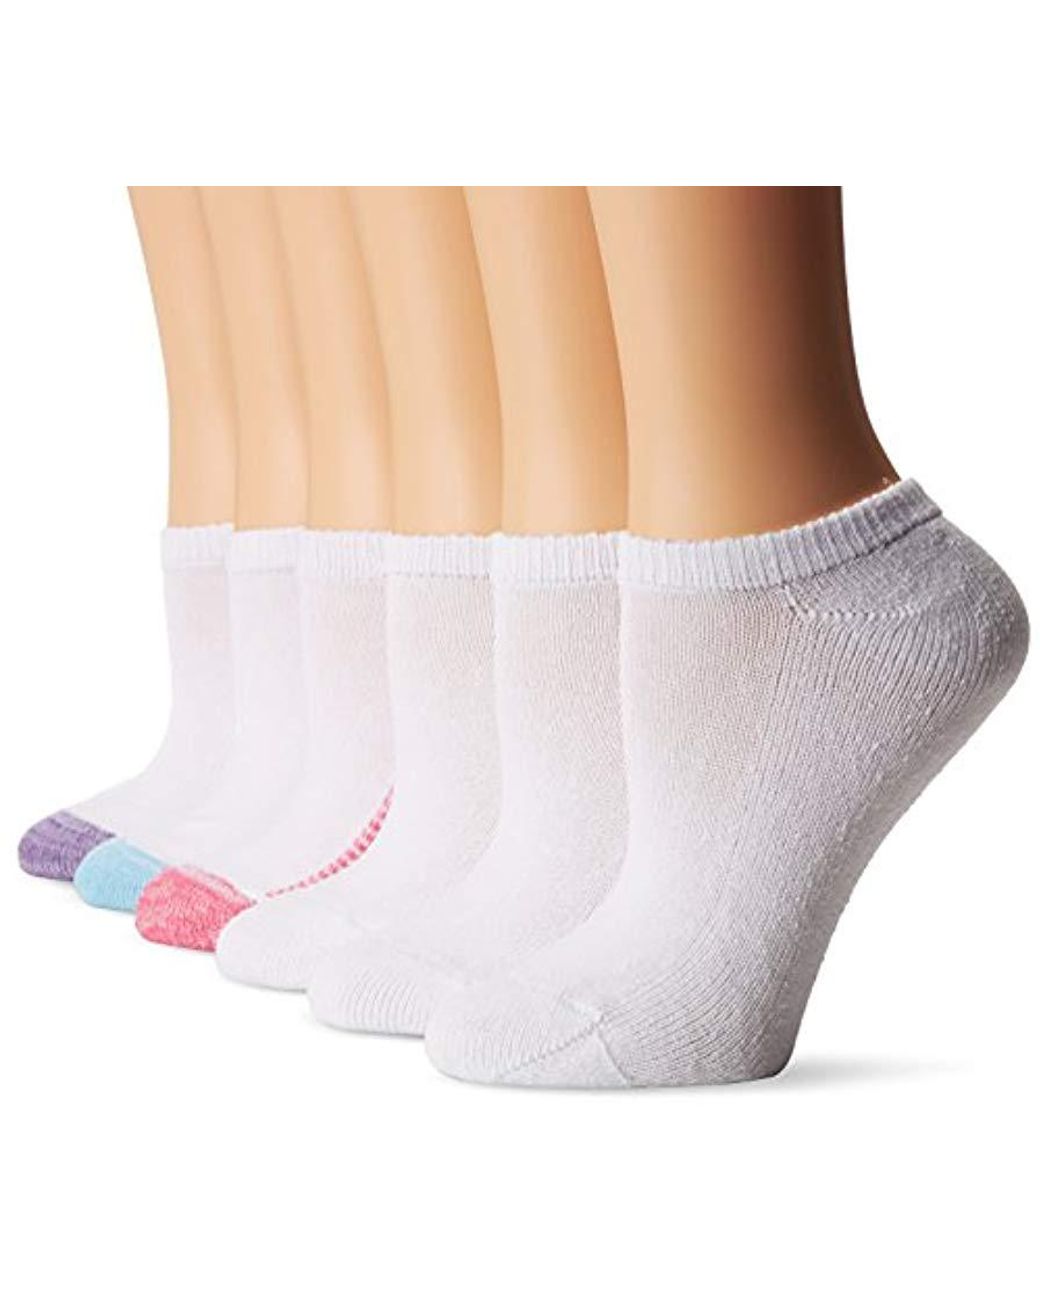 Lyst - Hanes Athletic No-show Socks, 6-pack in Pink - Save 63%